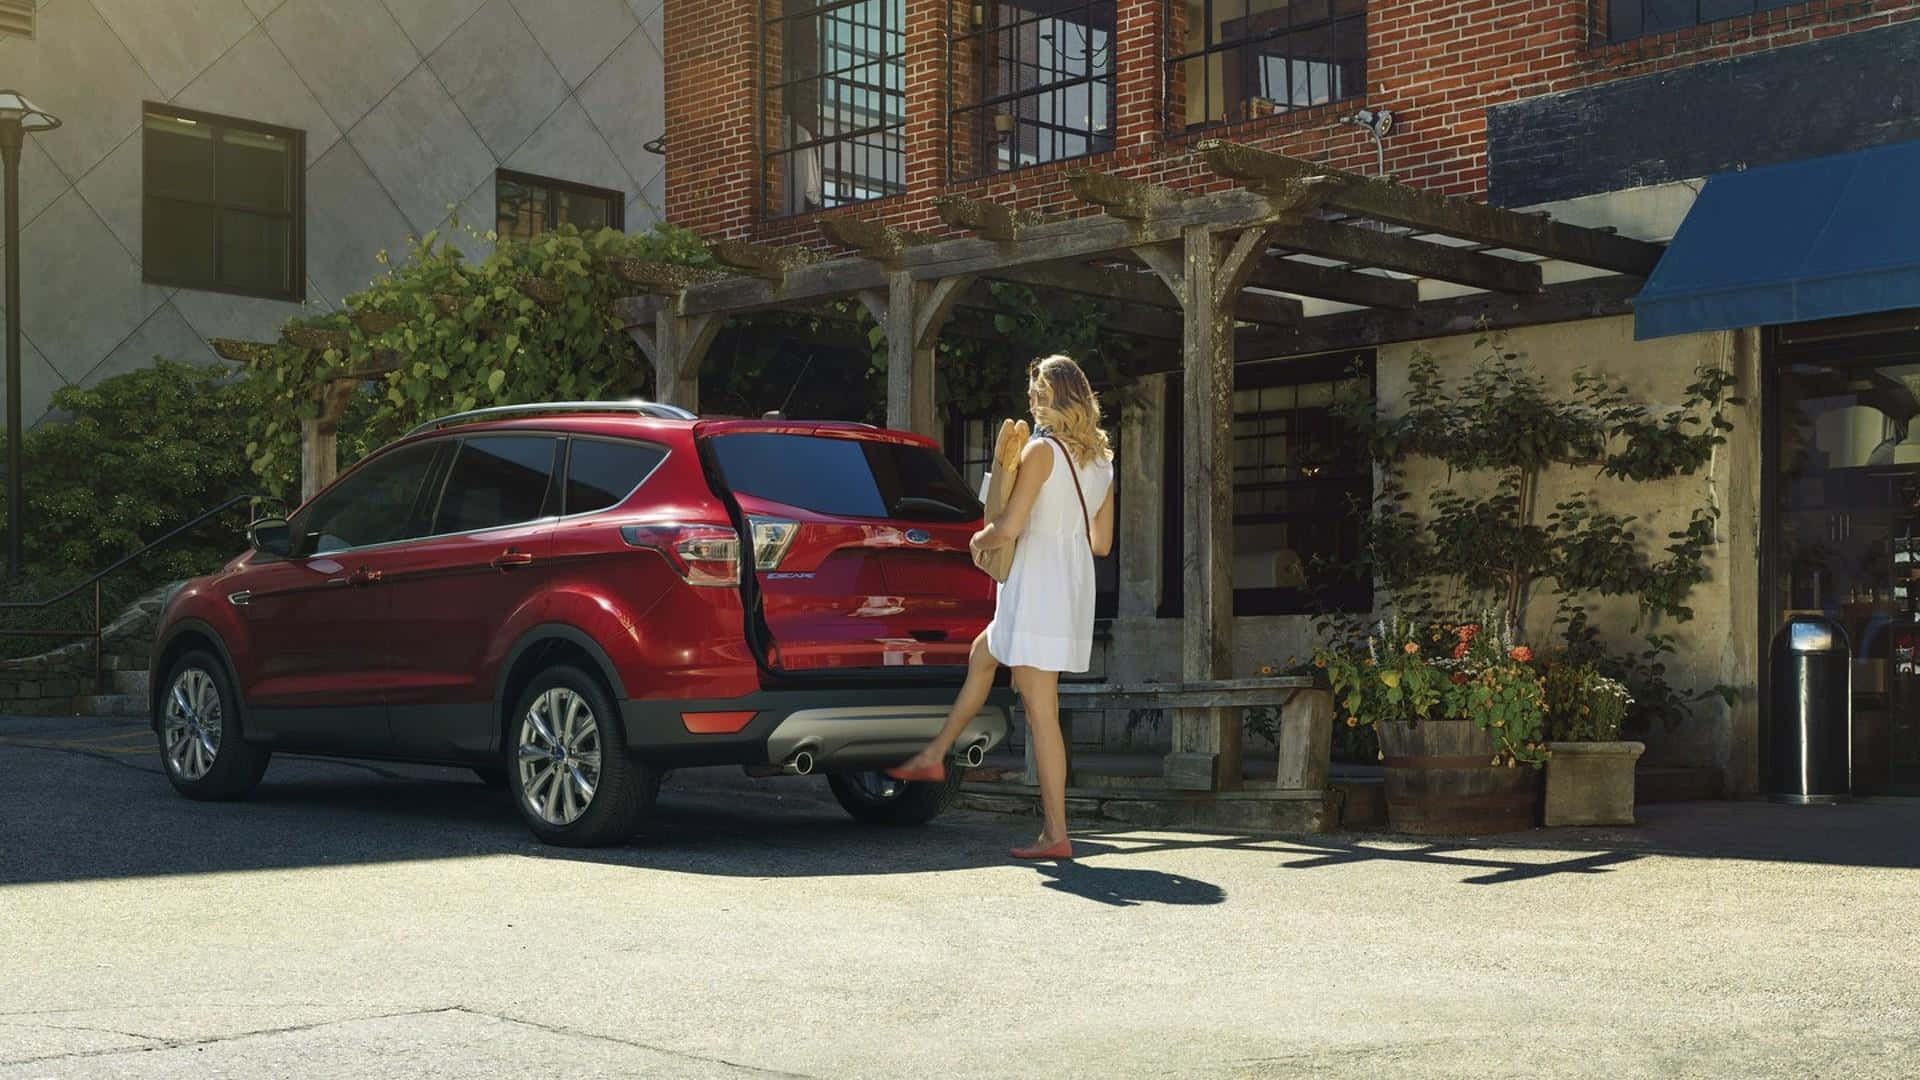 New Ford Escape Parked in Nature Wallpaper